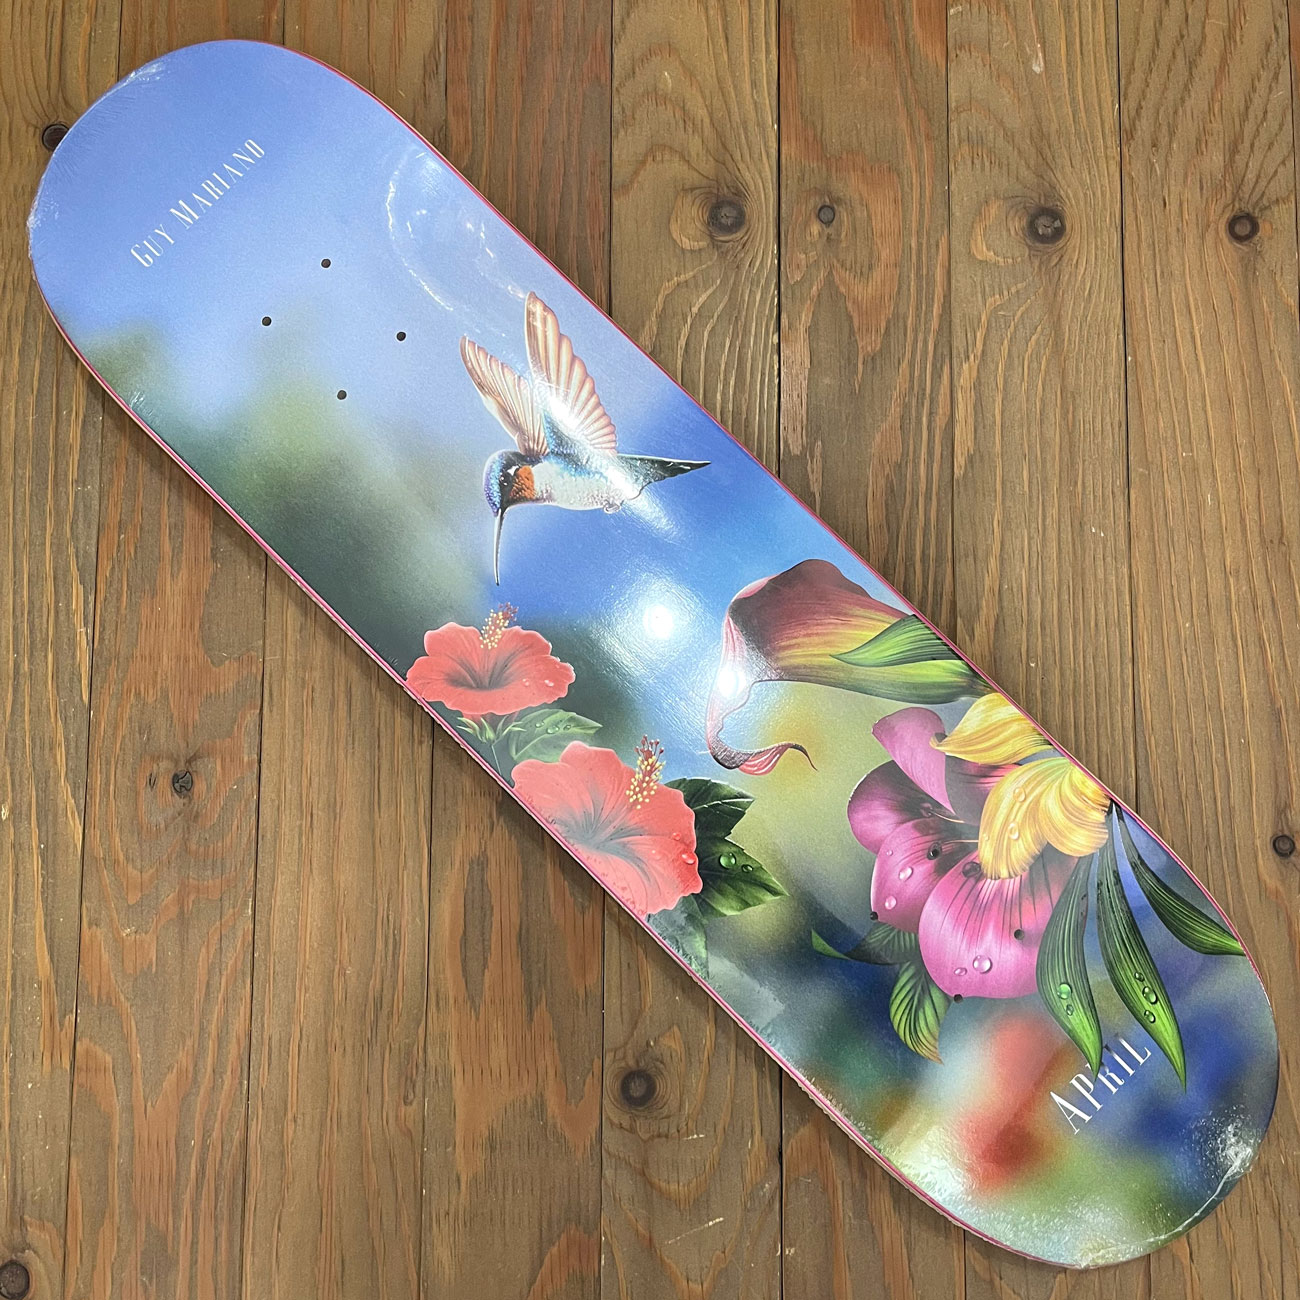 APRIL GUY MARIANO MOTHER NECTAR DECK 8.0/8.25inch